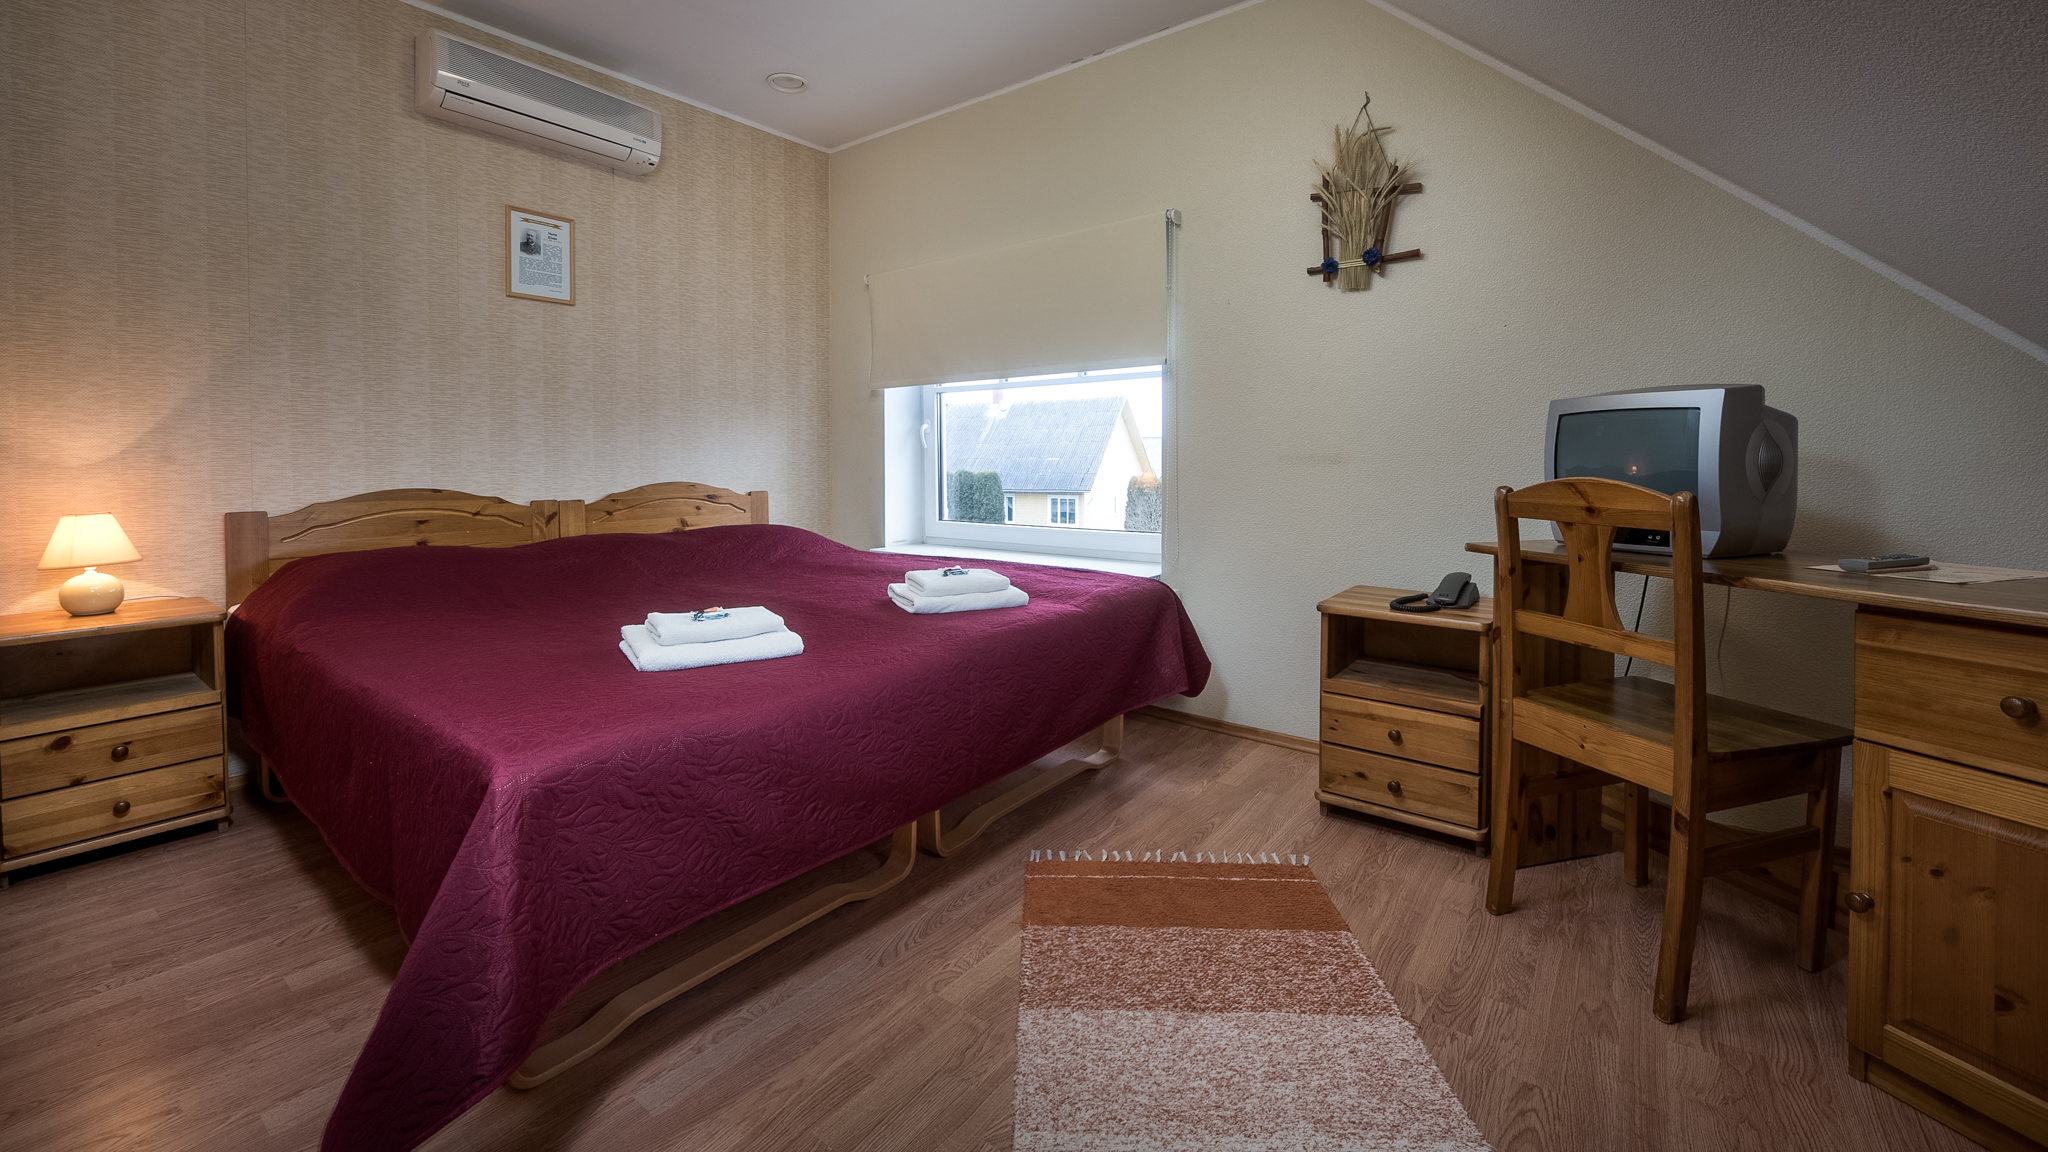 DOUBLE ROOM ONE DOUBLE BED (start from 45€/night)